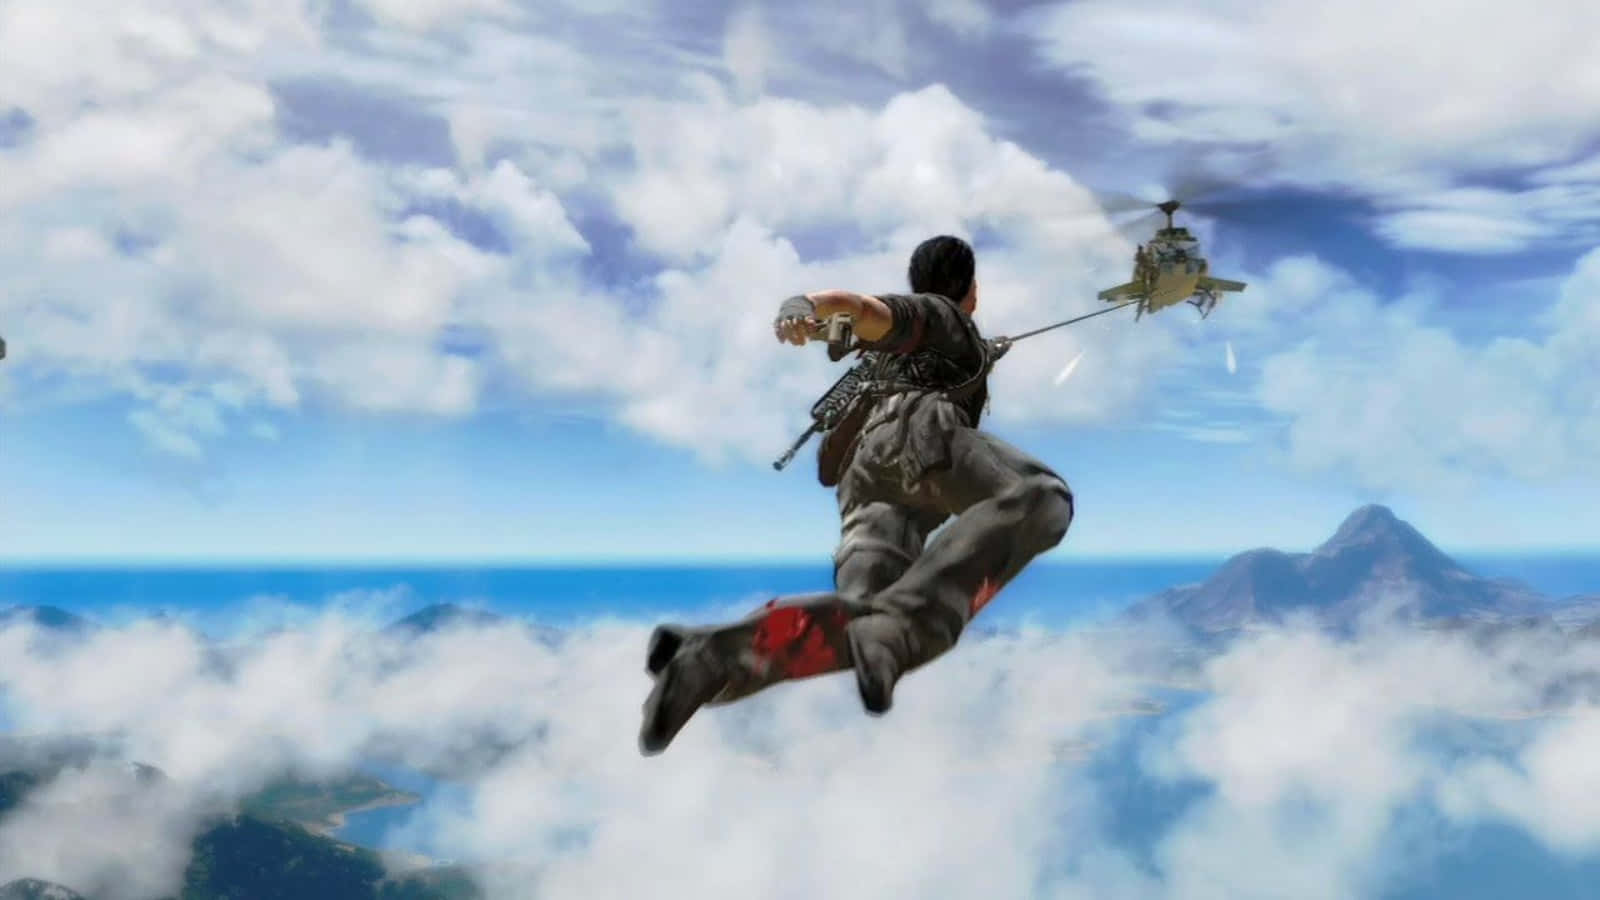 A Man Is Flying In The Air Above The Clouds Wallpaper